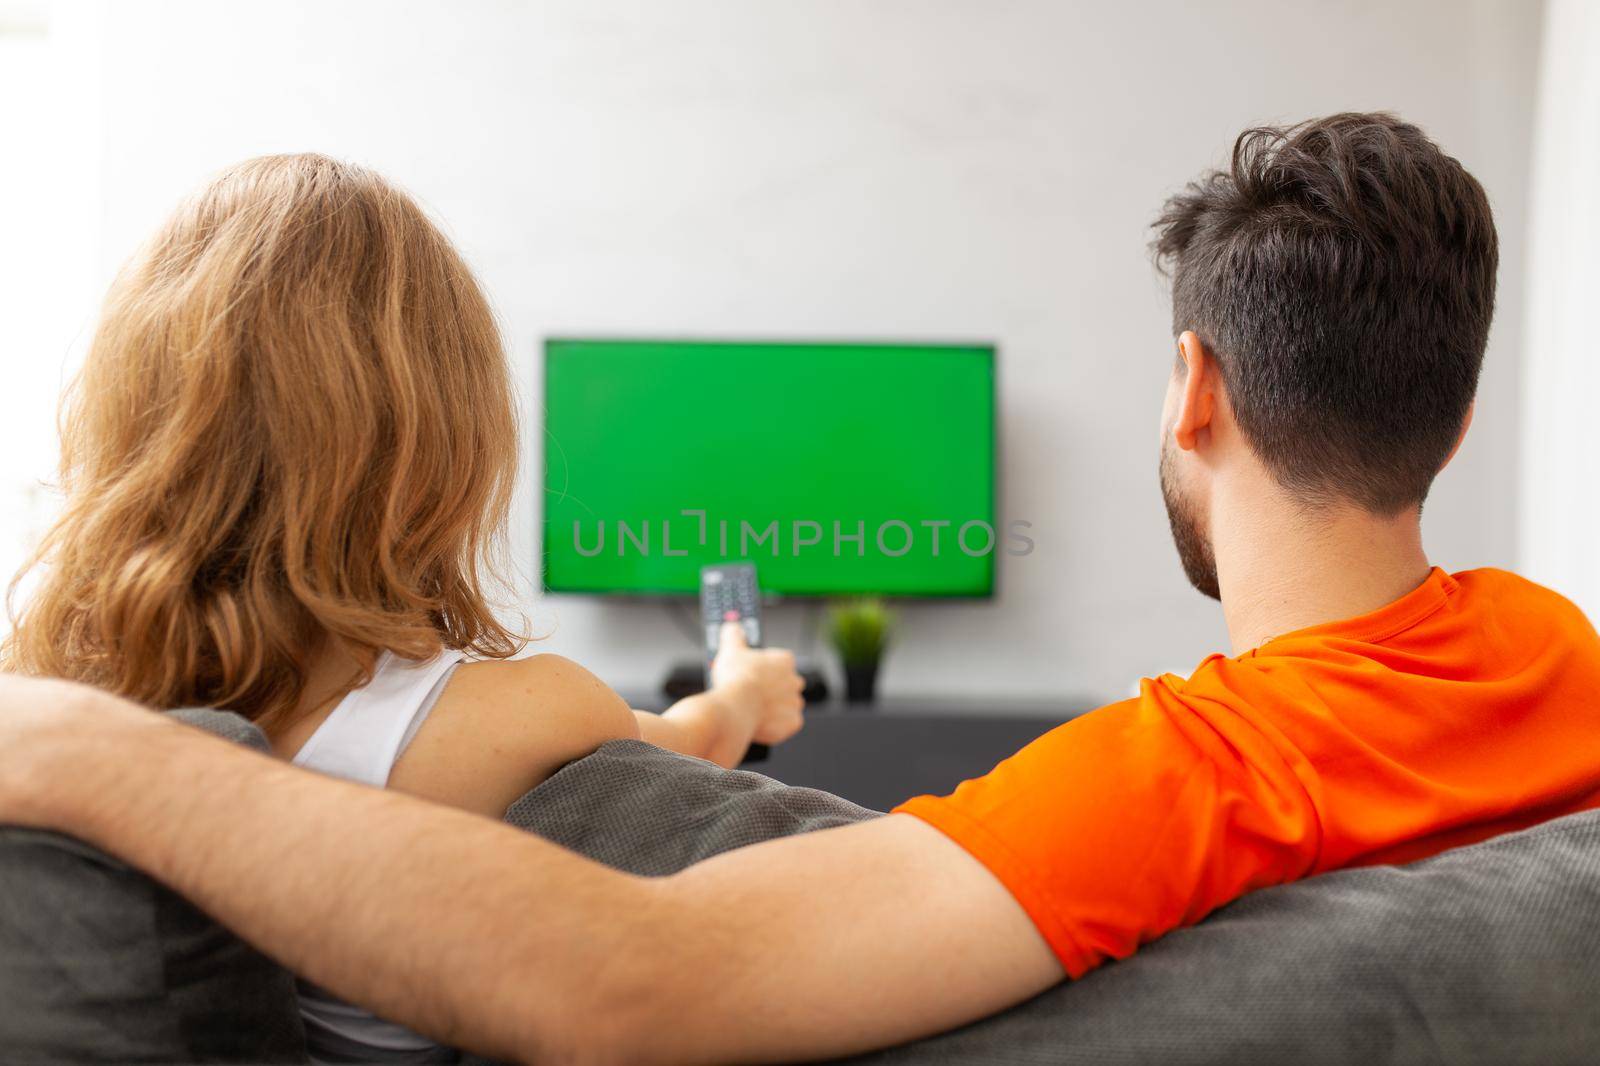 Couple watching tv with green screen. Girl pressing remote control.